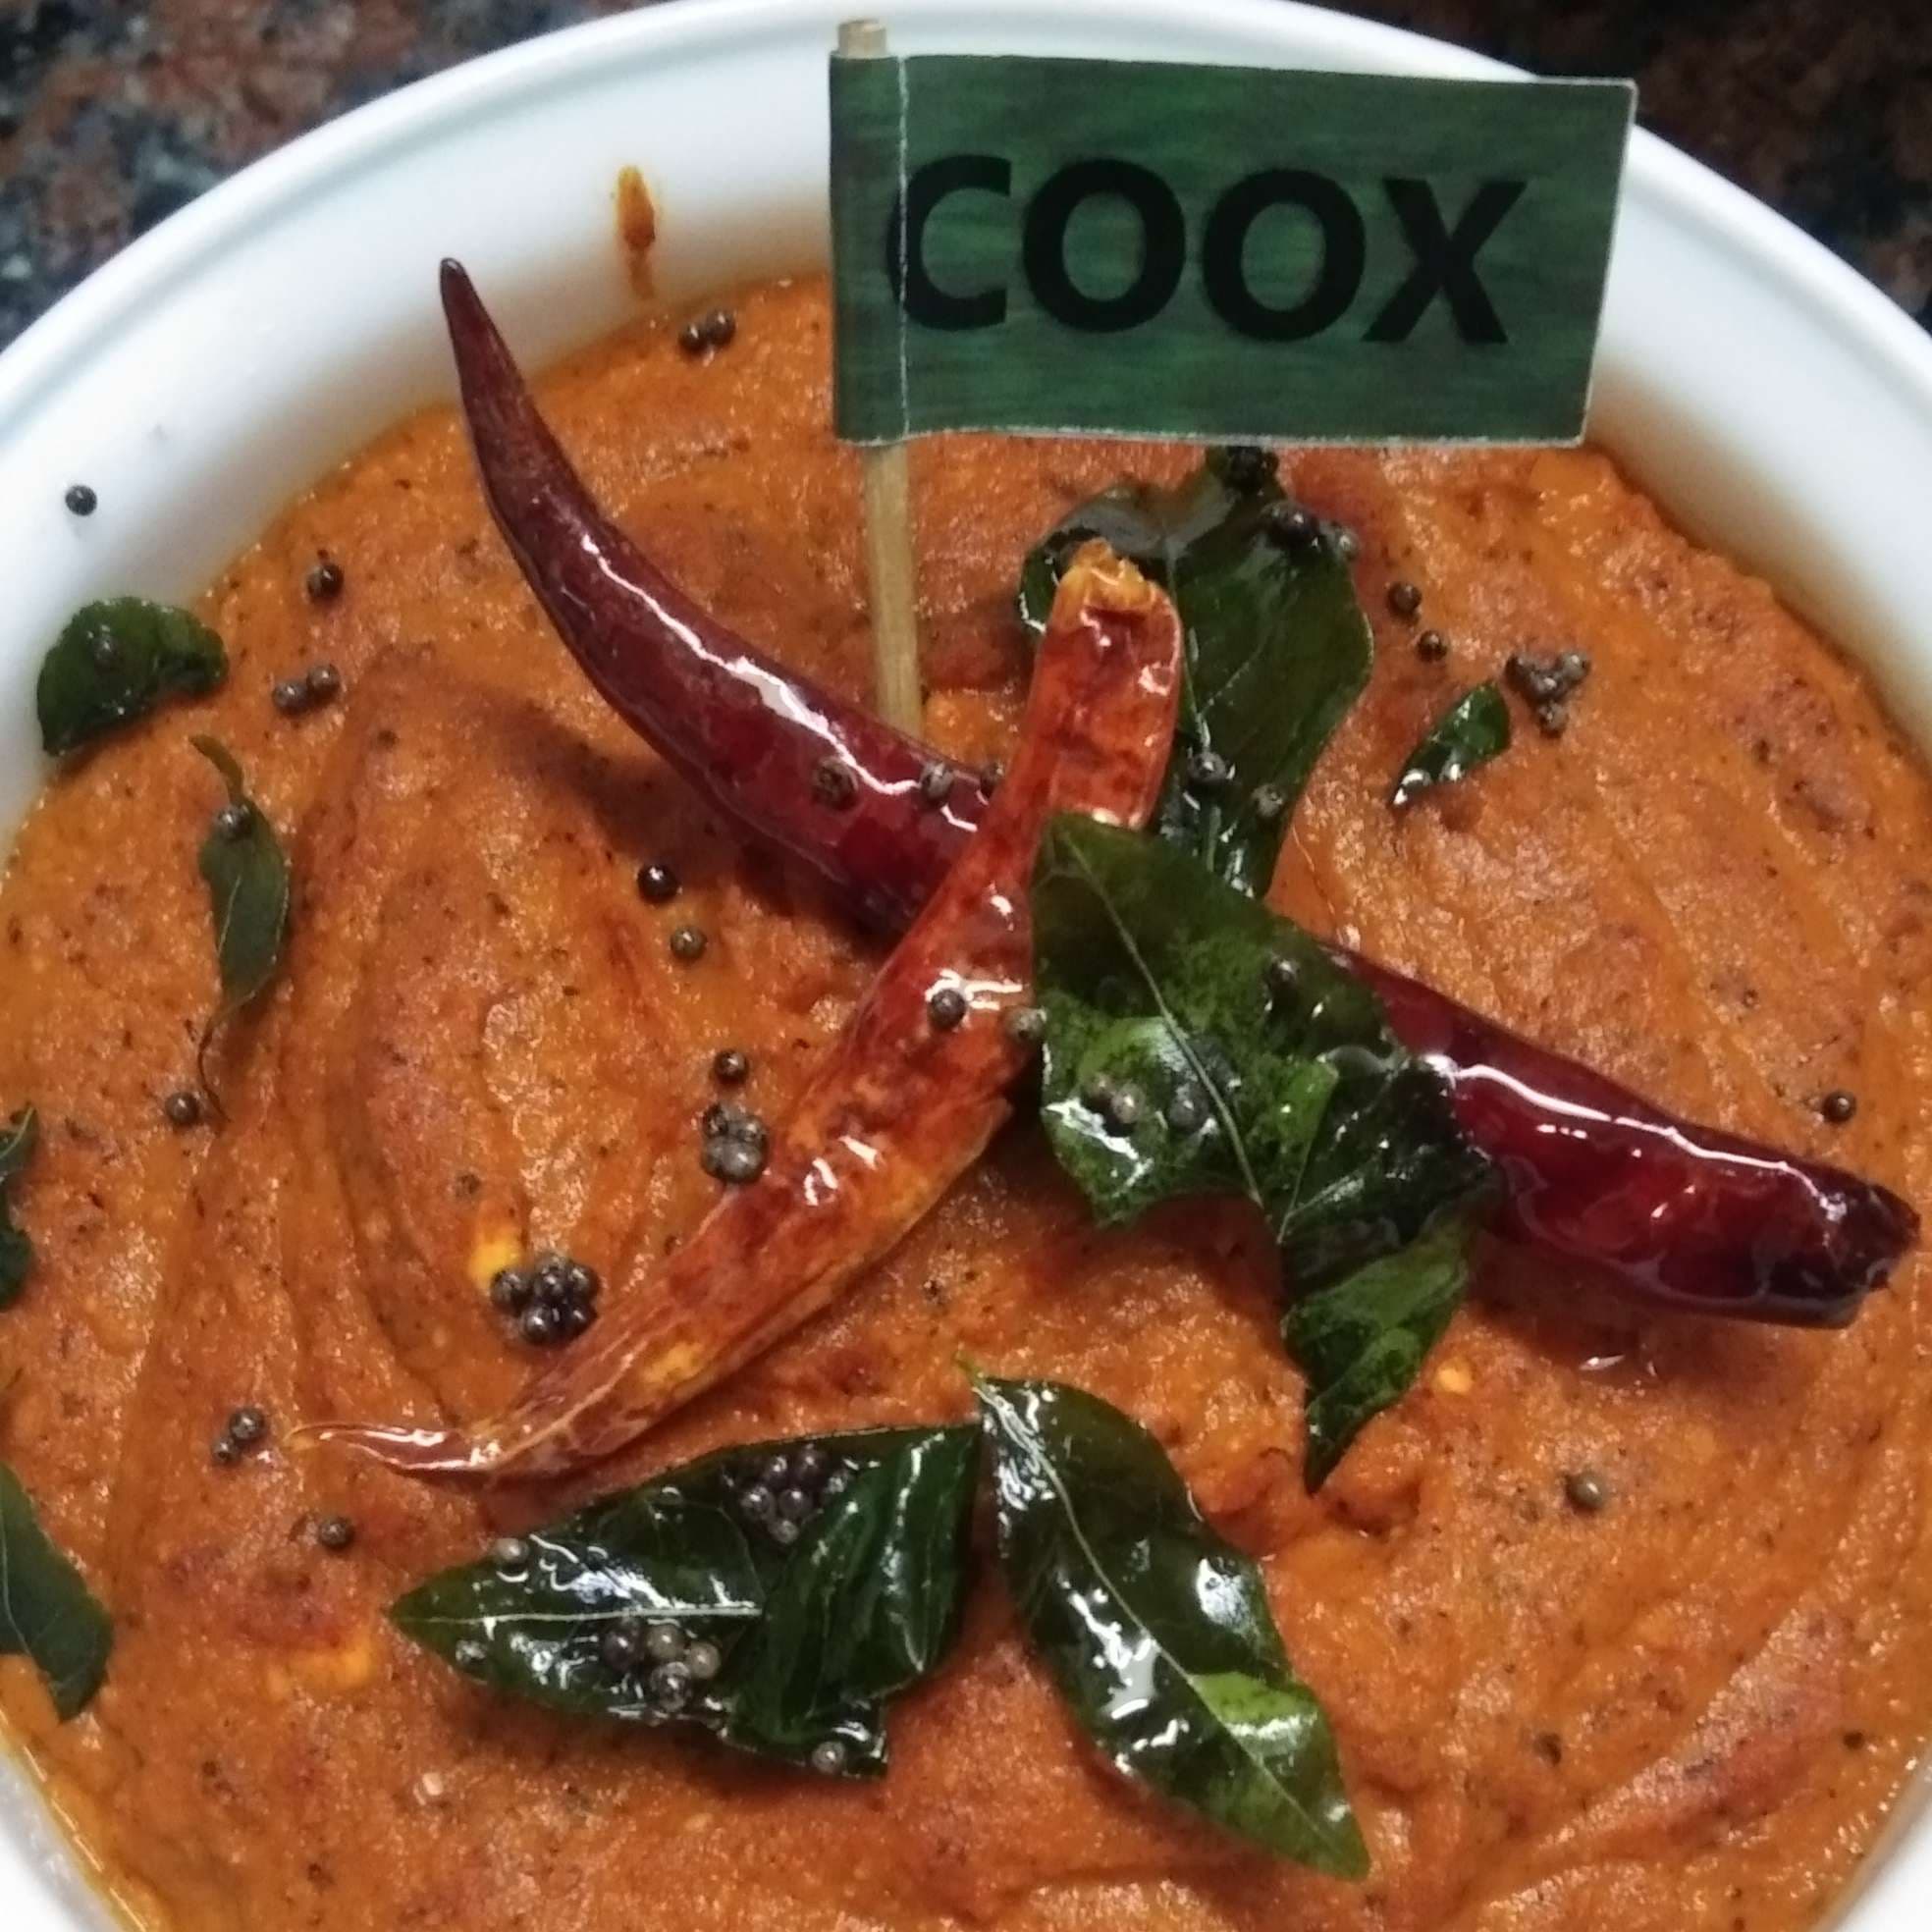 Tasty Mixed Veg Uttappam cooked by COOX chefs cooks during occasions parties events at home